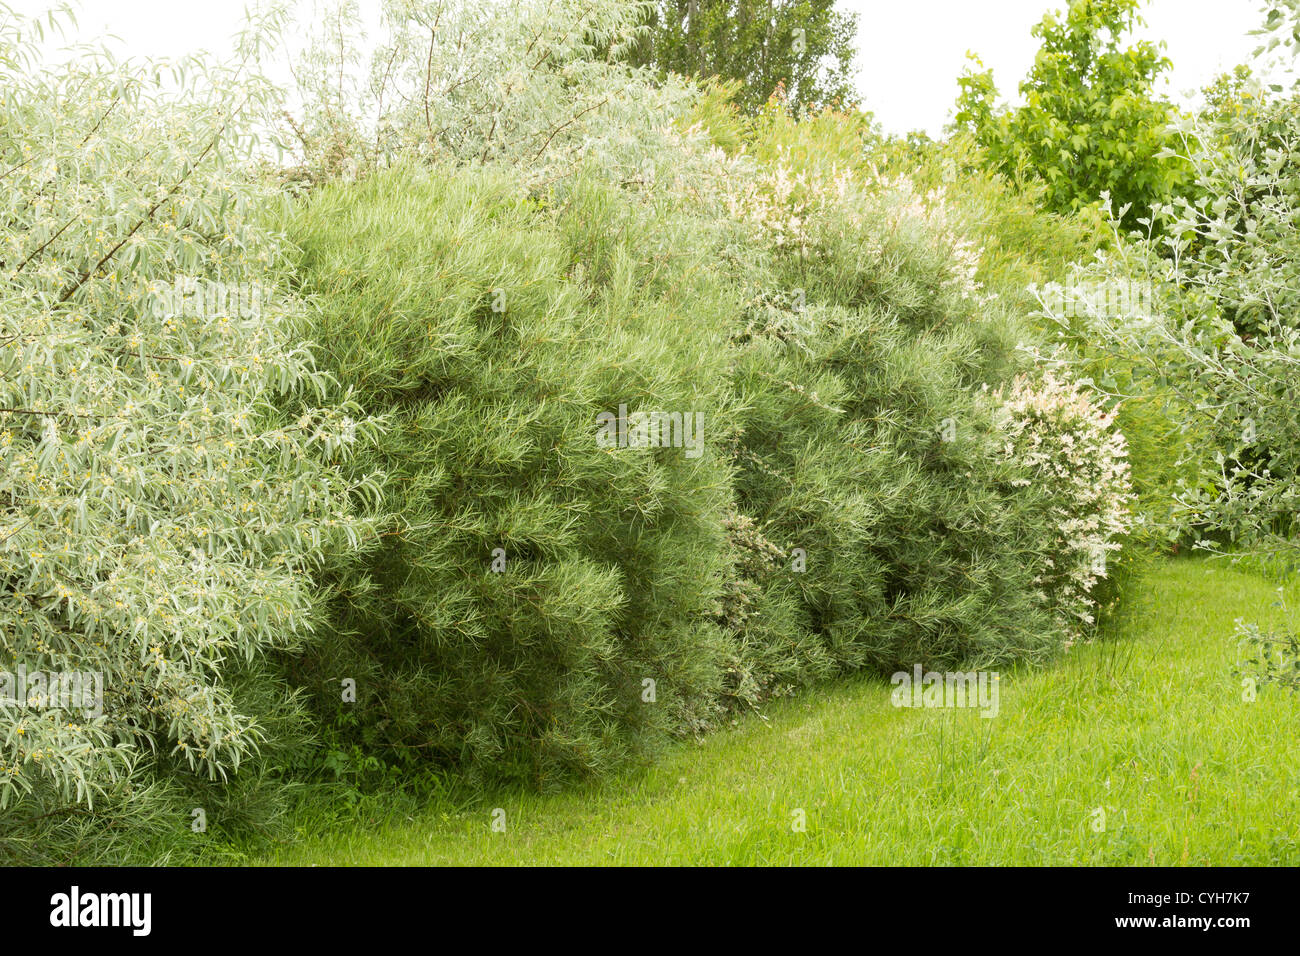 Hedge of shrubs with grey foliage with silver berry (Elaeagnus angustifolia), dappled willow, Blunt-leaved Willow Stock Photo